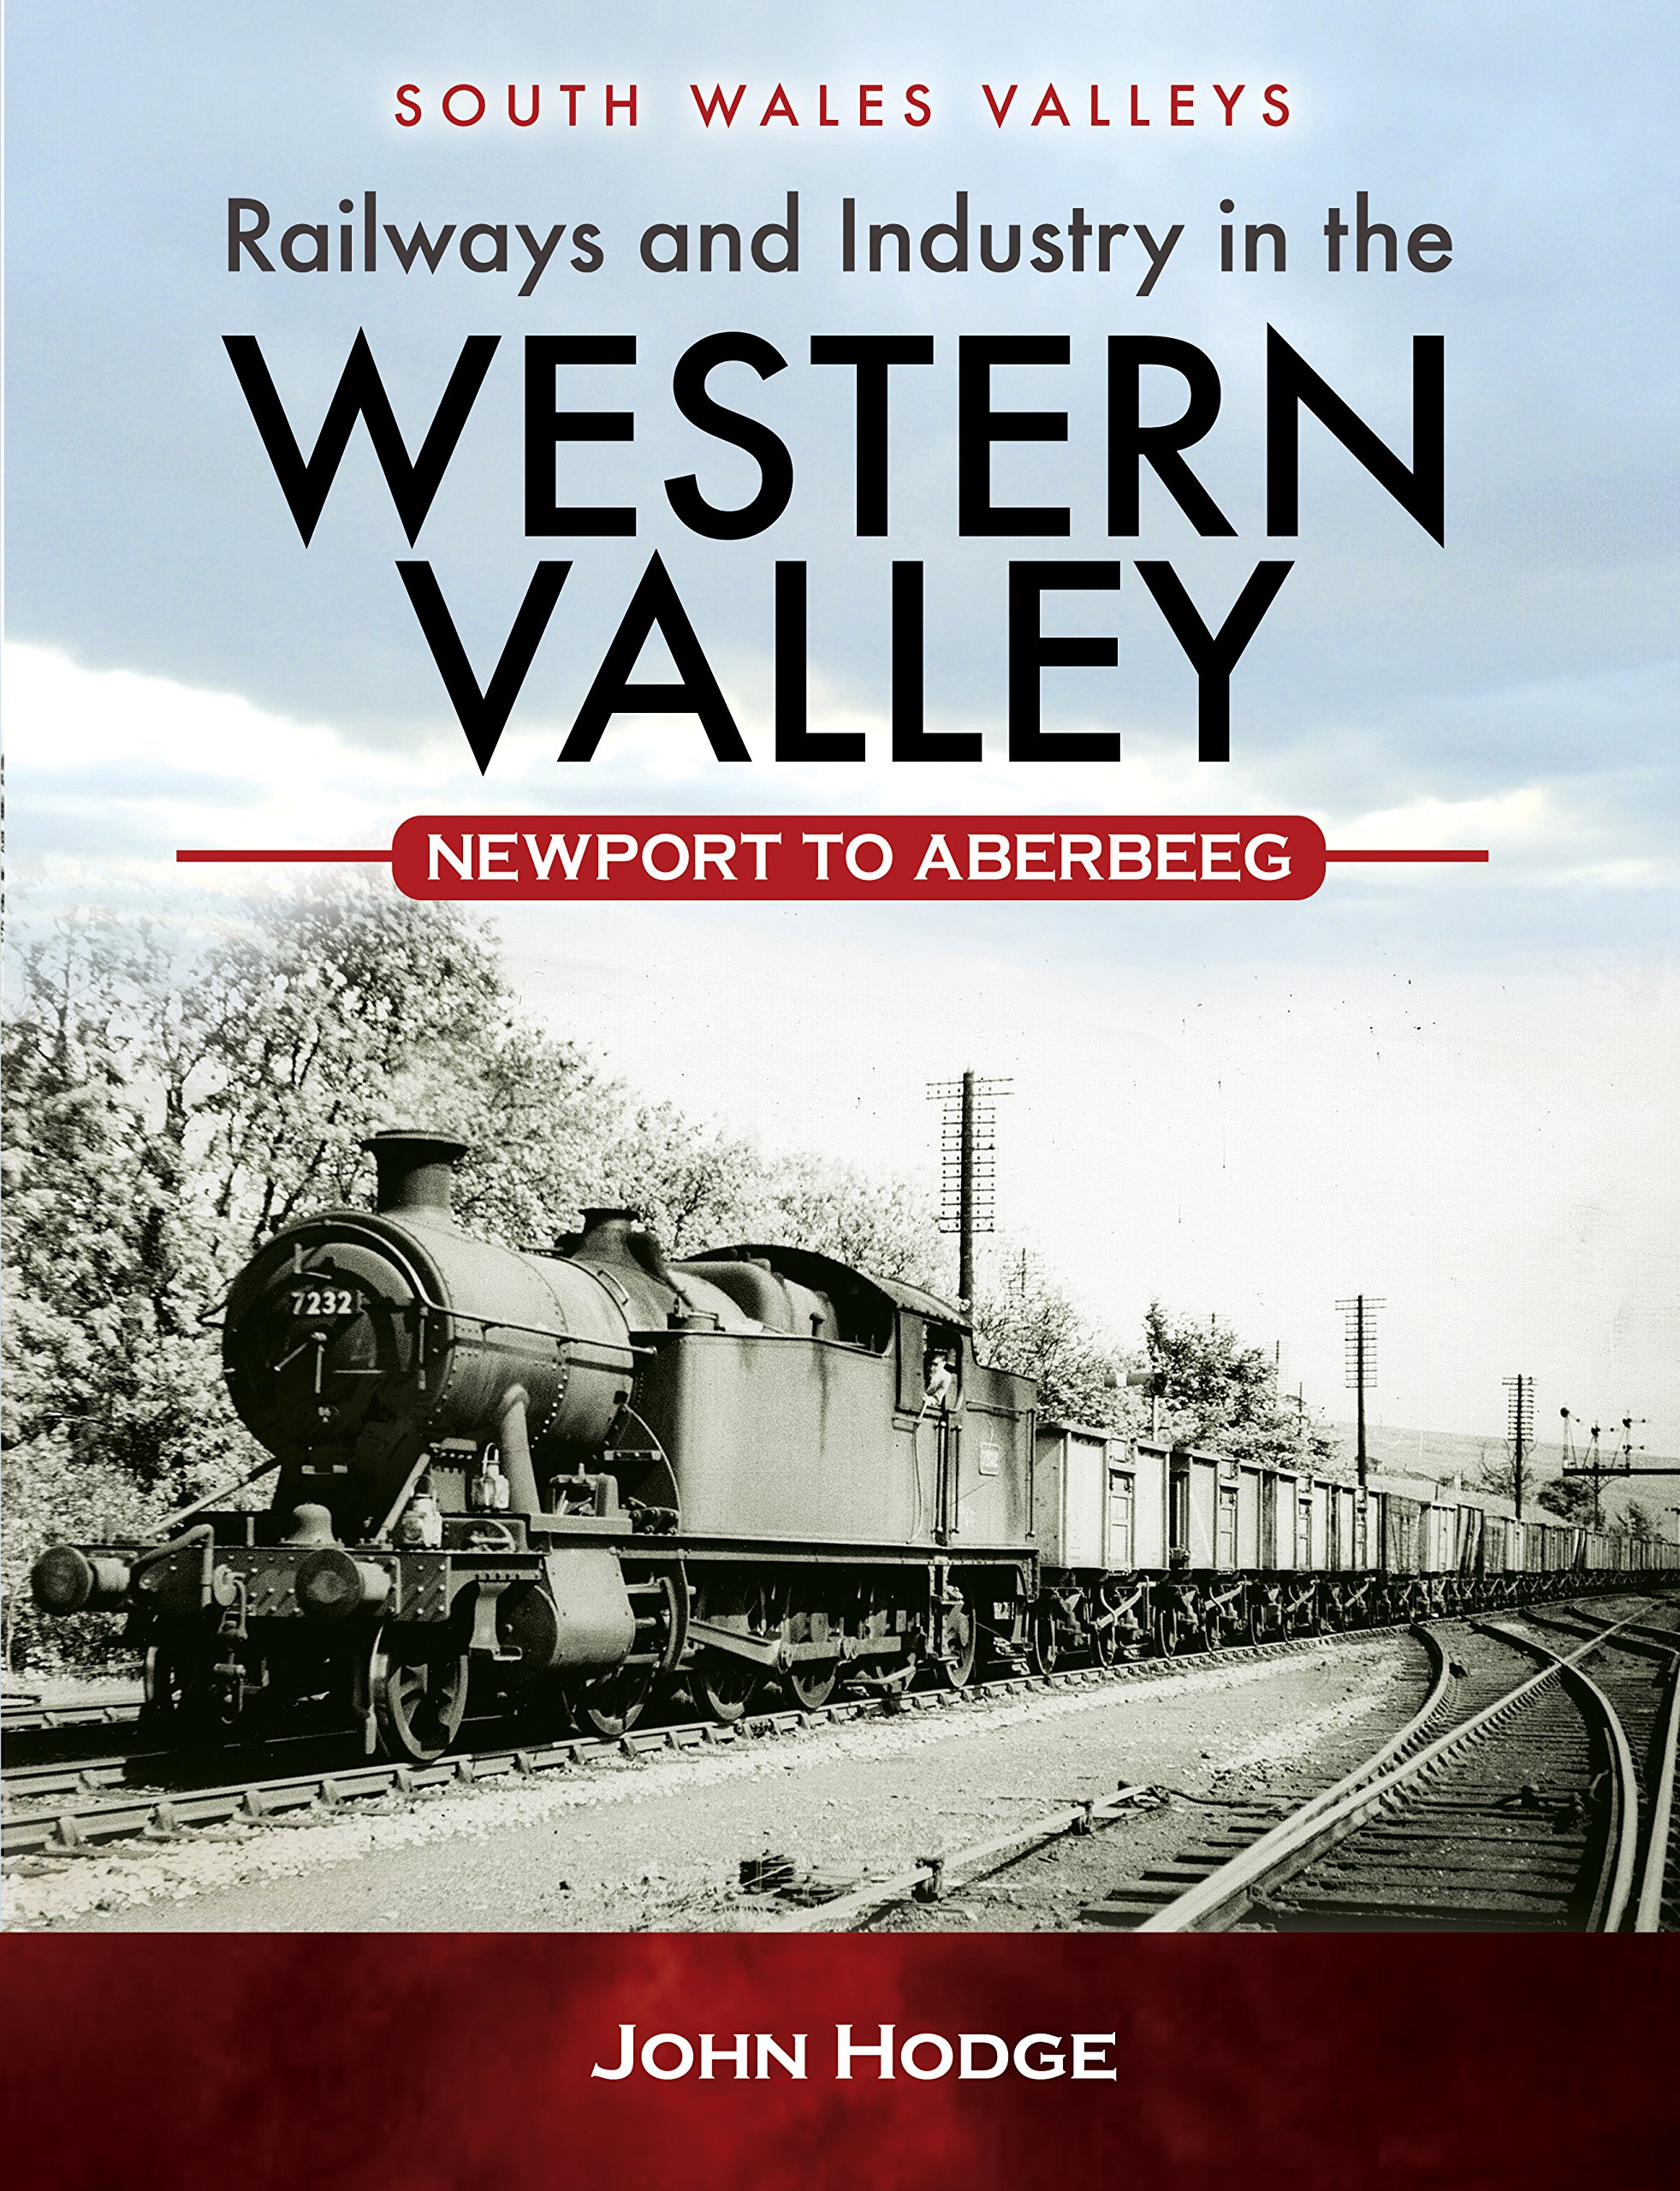 South Wales Valleys: Railways and Industry in the Western Valley: Newport to Aberbeeg